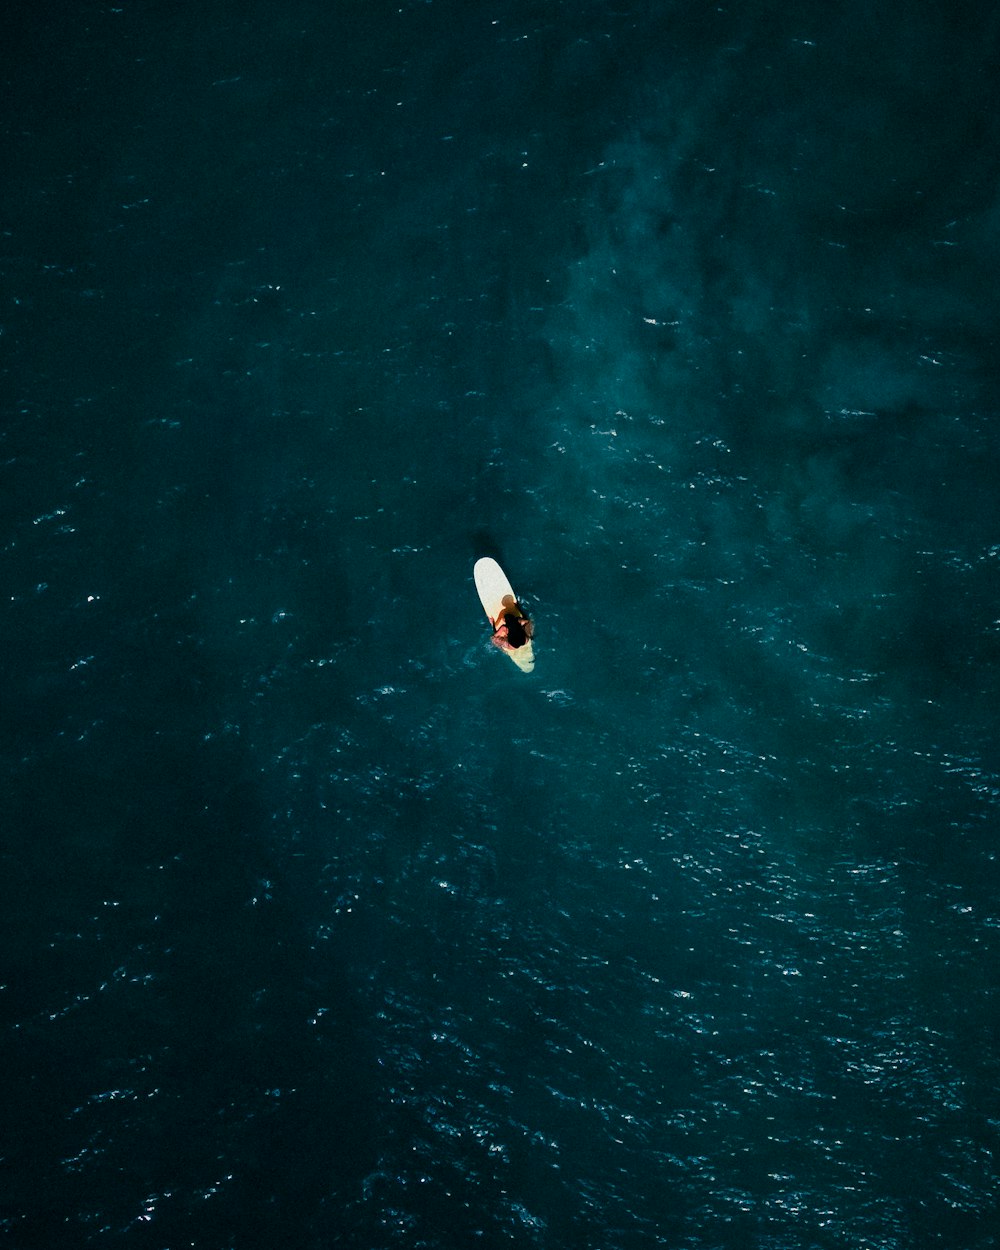 a person on a surfboard in the middle of the ocean